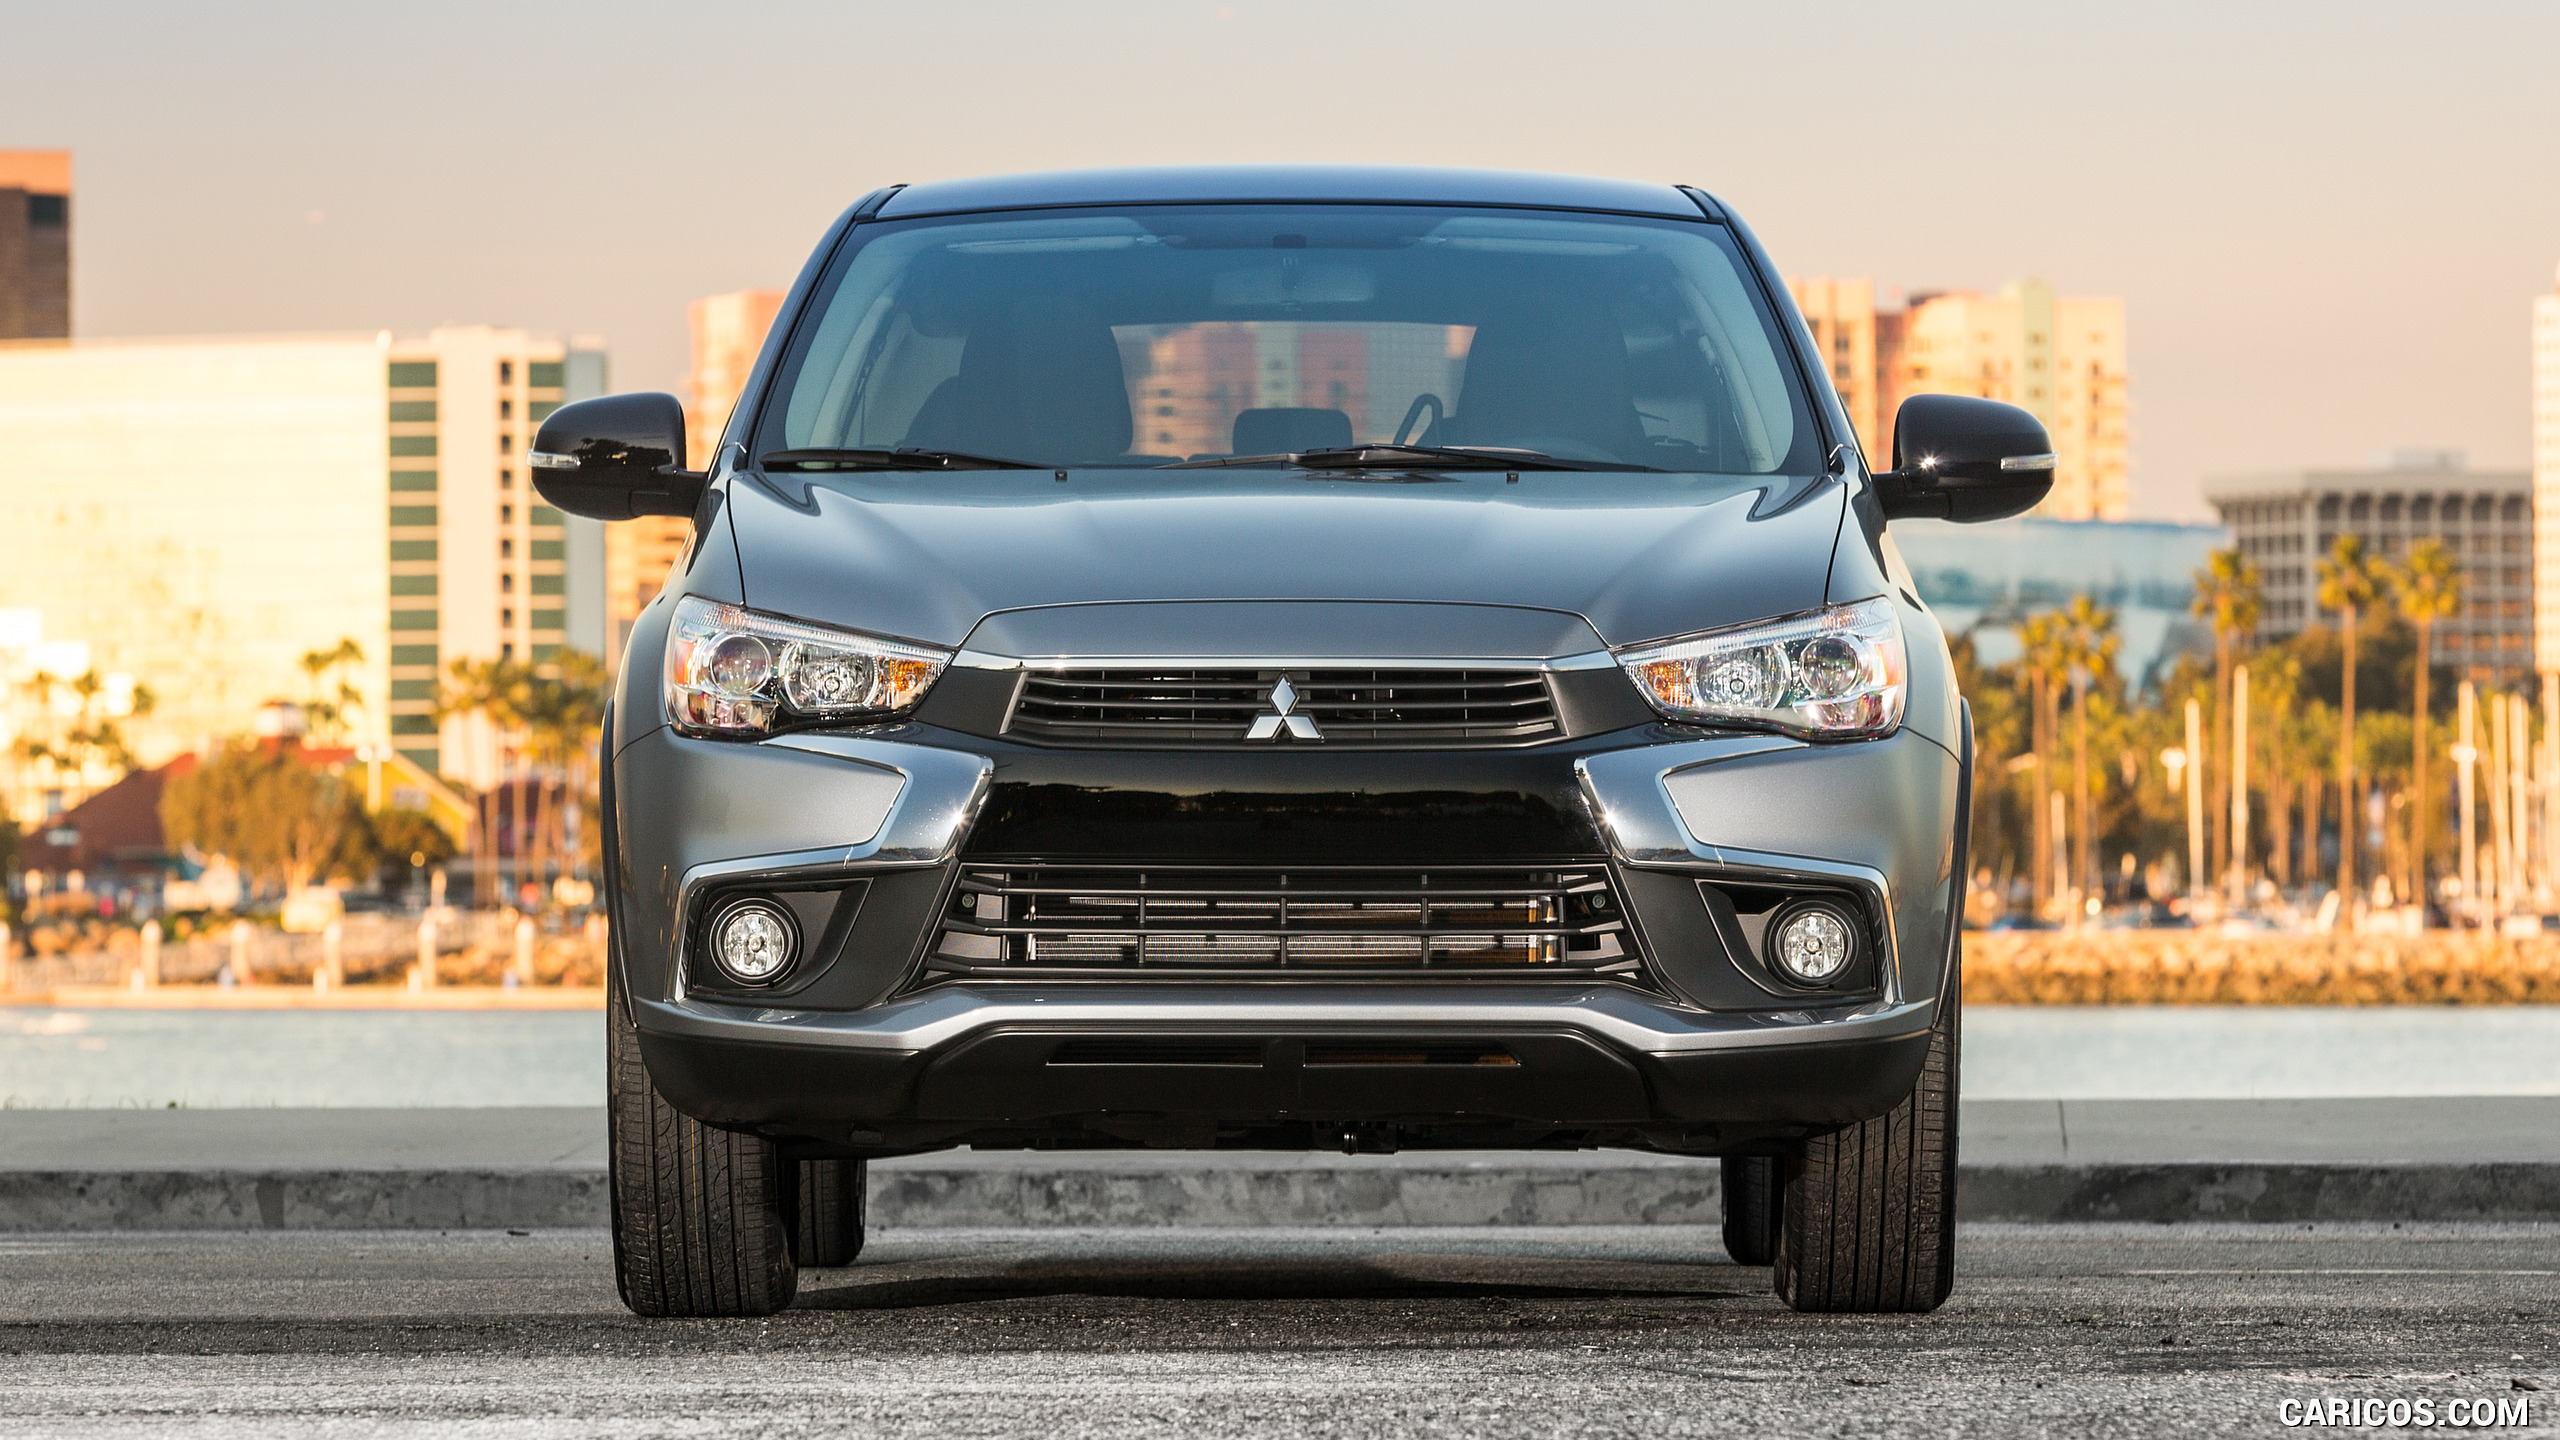 2017 Mitsubishi Outlander Sport Limited Edition - Front, #3 of 32